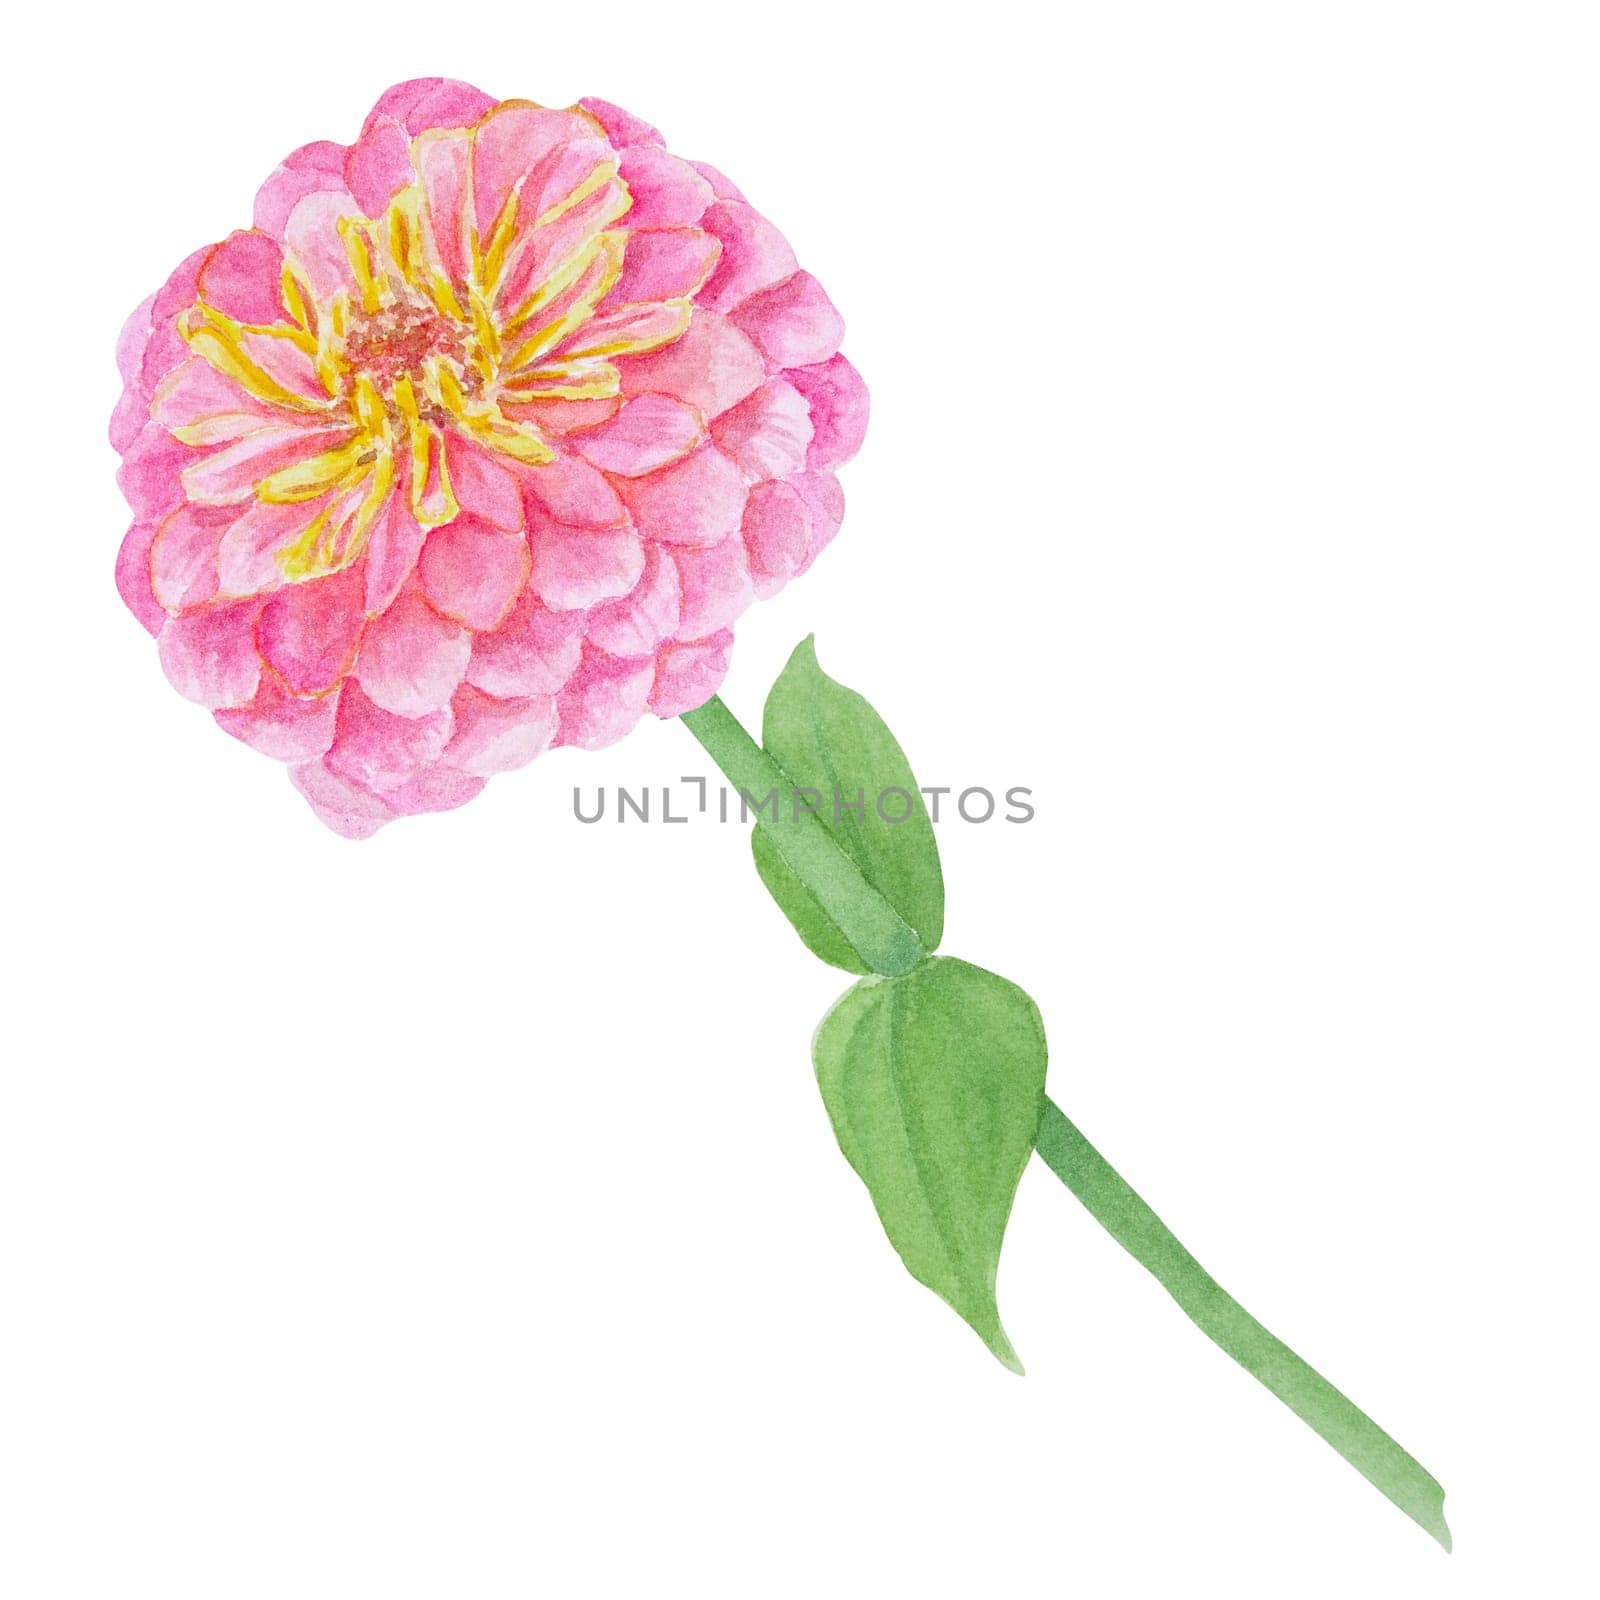 Pink Zinnia watercolor illustration. Hand drawn botanical painting, floral sketch. Colorful flower clipart for summer or autumn design of wedding invitation, prints, greetings, sublimation, textile by florainlove_art